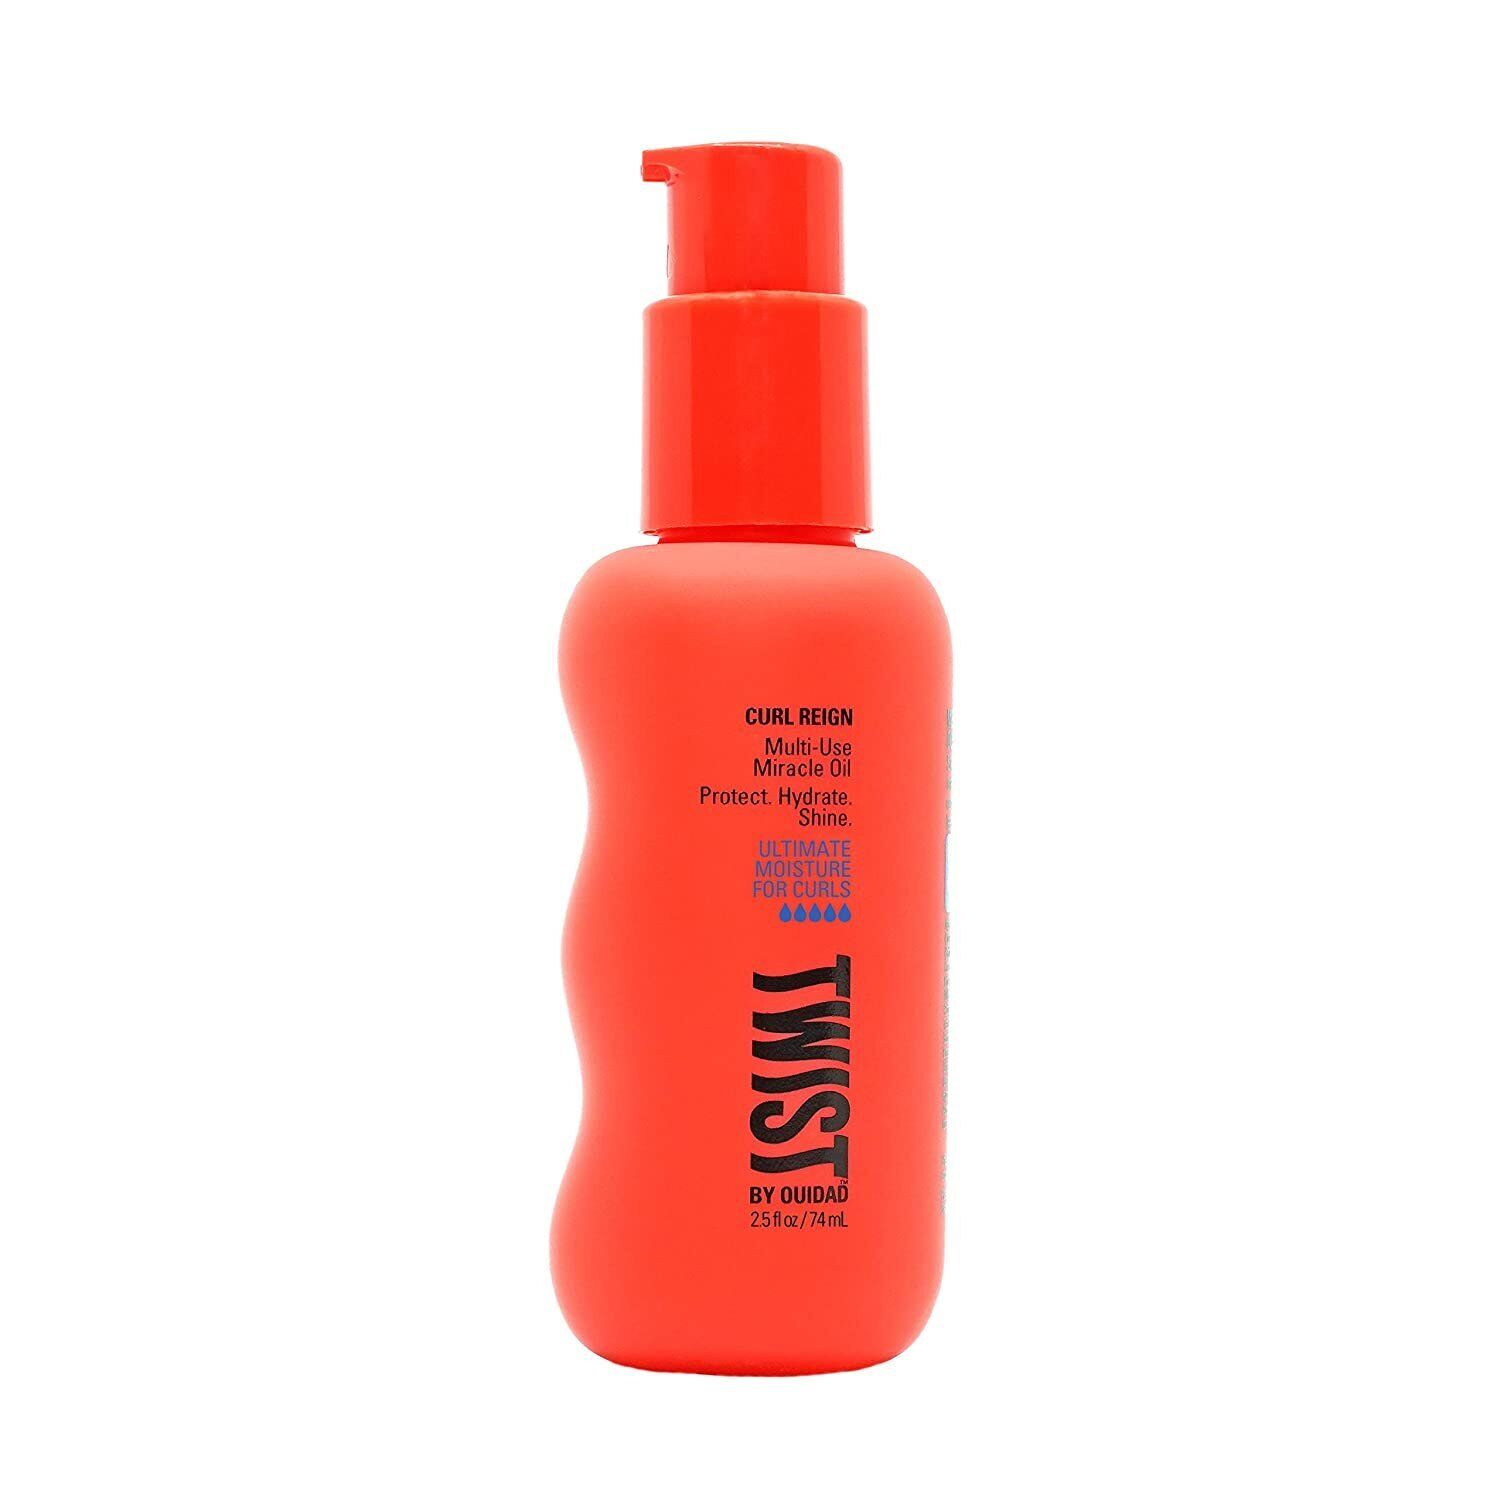 TWIST Curl Reign Multi-use Miracle Oil, 2.5 ounces - Click Image to Close